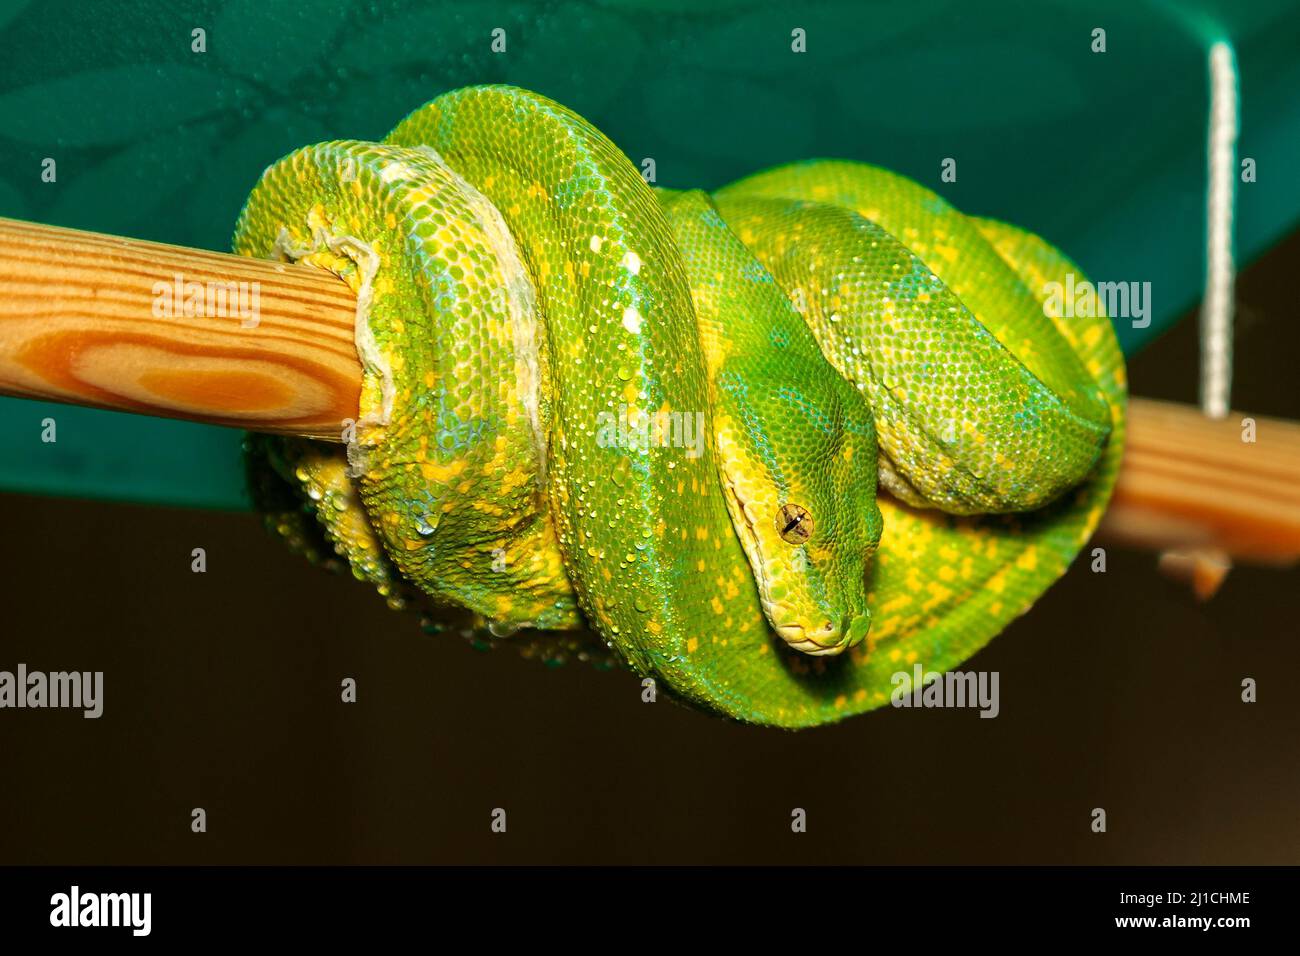 Corallus caninus - Green Snake - Tree green snake coiled on a stick. The head and eyes are visible. Stock Photo